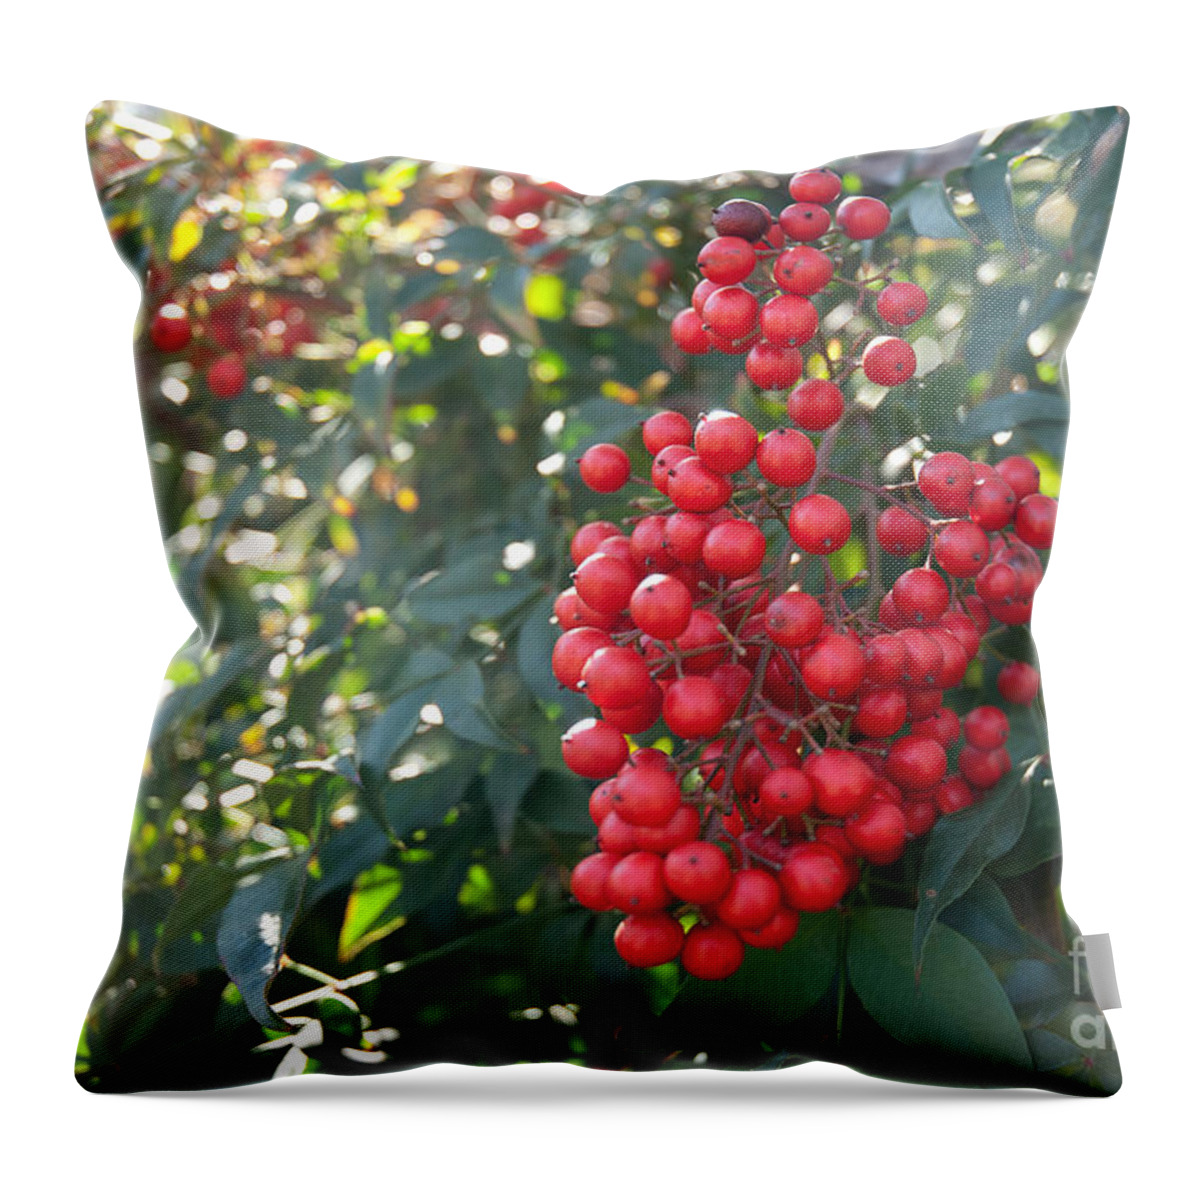 Red Berries Throw Pillow featuring the photograph Winter's Berries by Lena Wilhite